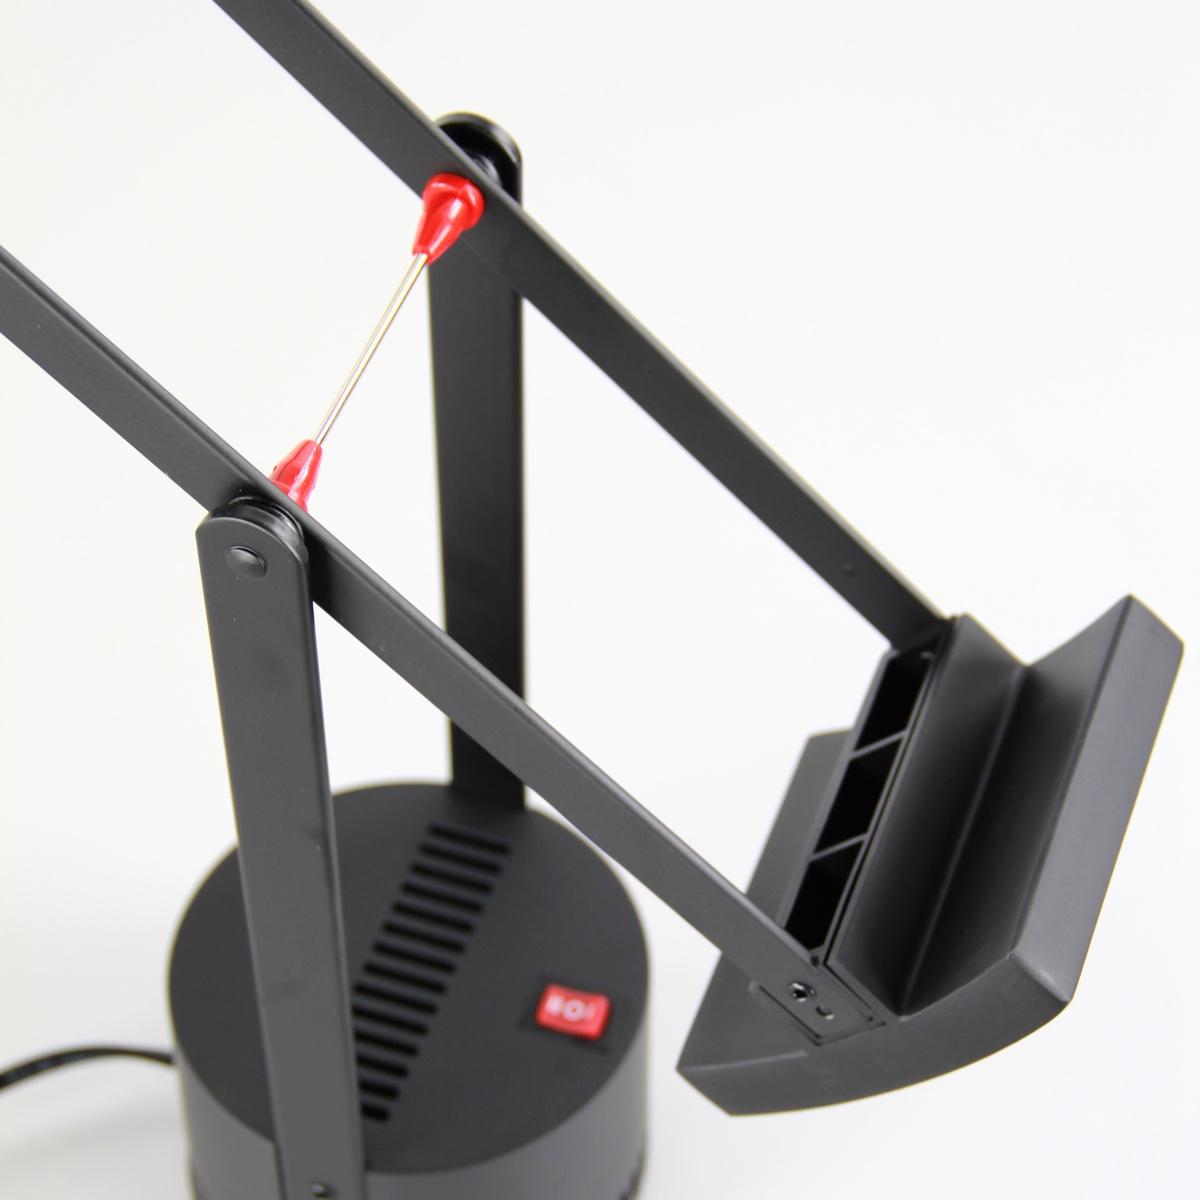 Tizio desk lamp (1972) with red accents. Image via dmlights.